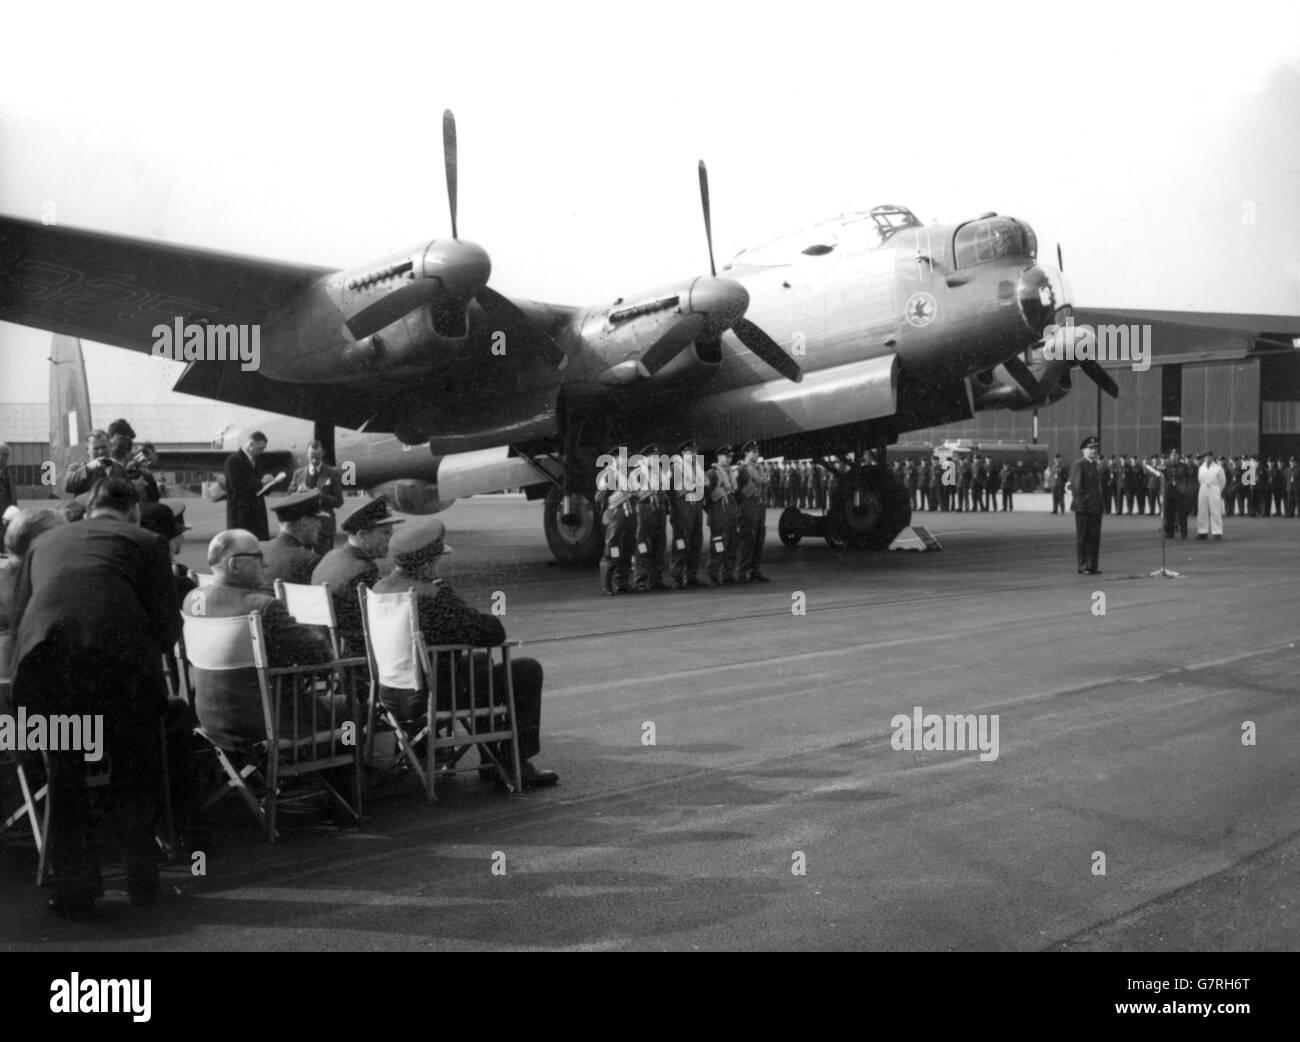 The Leave-taking ceremony under the shadow of the last of the Lancasters at St. Mawgan Coastal Command Station, Cornwall. Air Marshall Sir Bryan Reynolds, Coastal Command, gave the valedictory address. Bomber pilots who had flown the Lancaster raids, and high-ranking RAF officers attended as the plane flew away to the breakers yards. The four-engined Lancaster D for Delta, was withdrawn from Bomber Command in 1953 and has since then been flown by crews from Coastal Command. The Lancaster Bombers flew more than 156,000 sorties in the WWII and dropped over 600,000 tons of high explosive bombs. Stock Photo